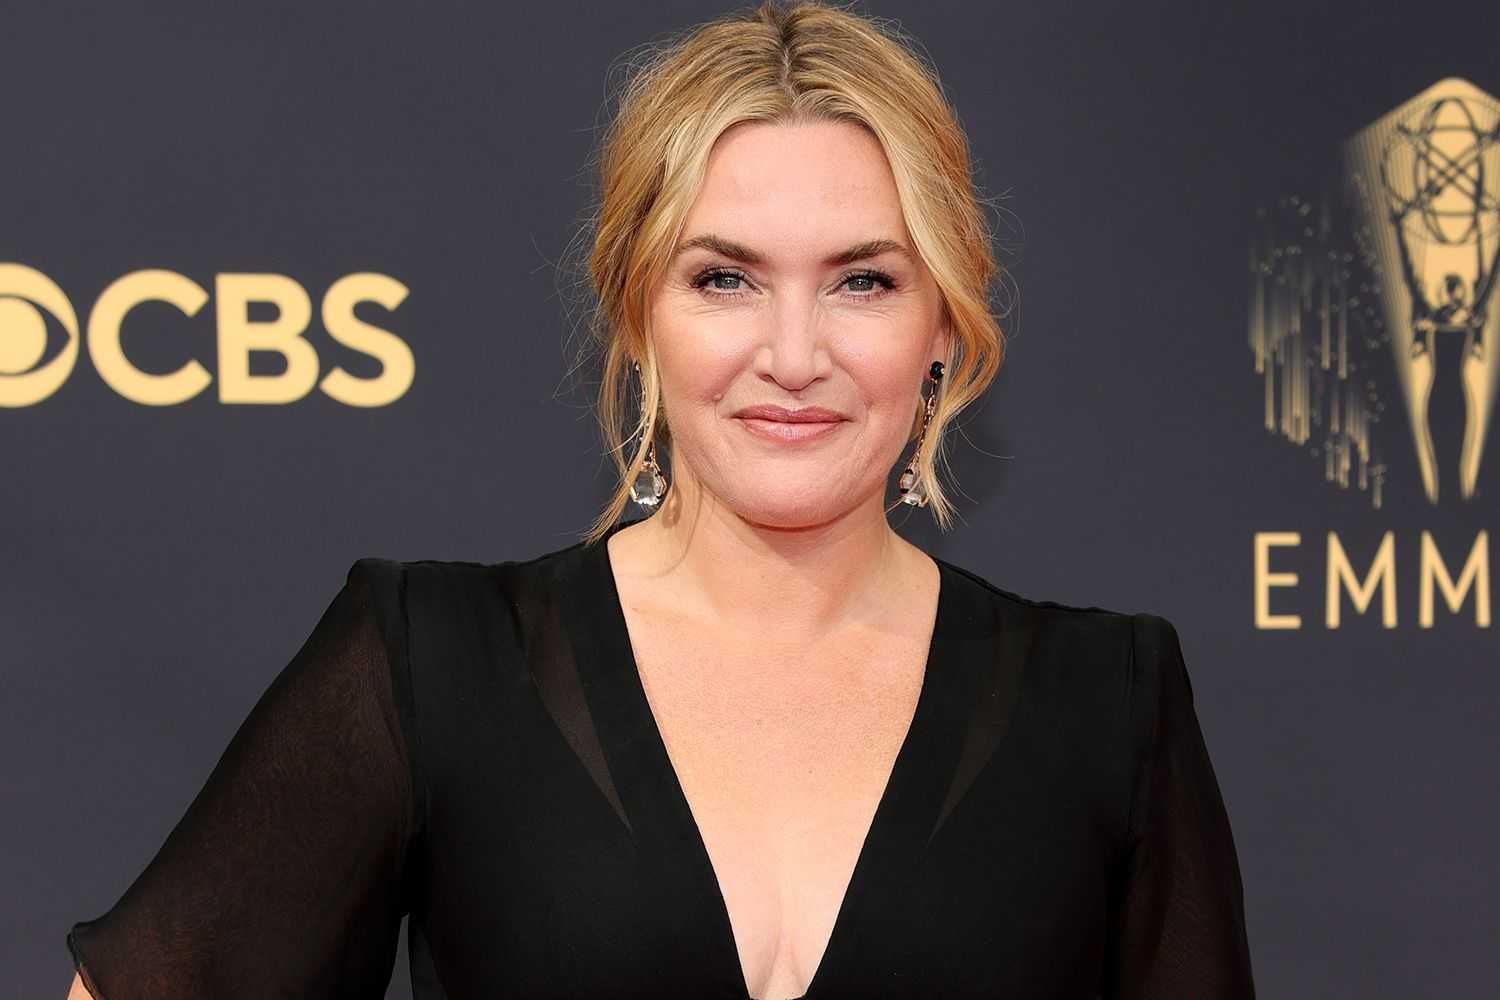 The Regime: Kate Winslet makes TV comeback as a dictator in HBO's